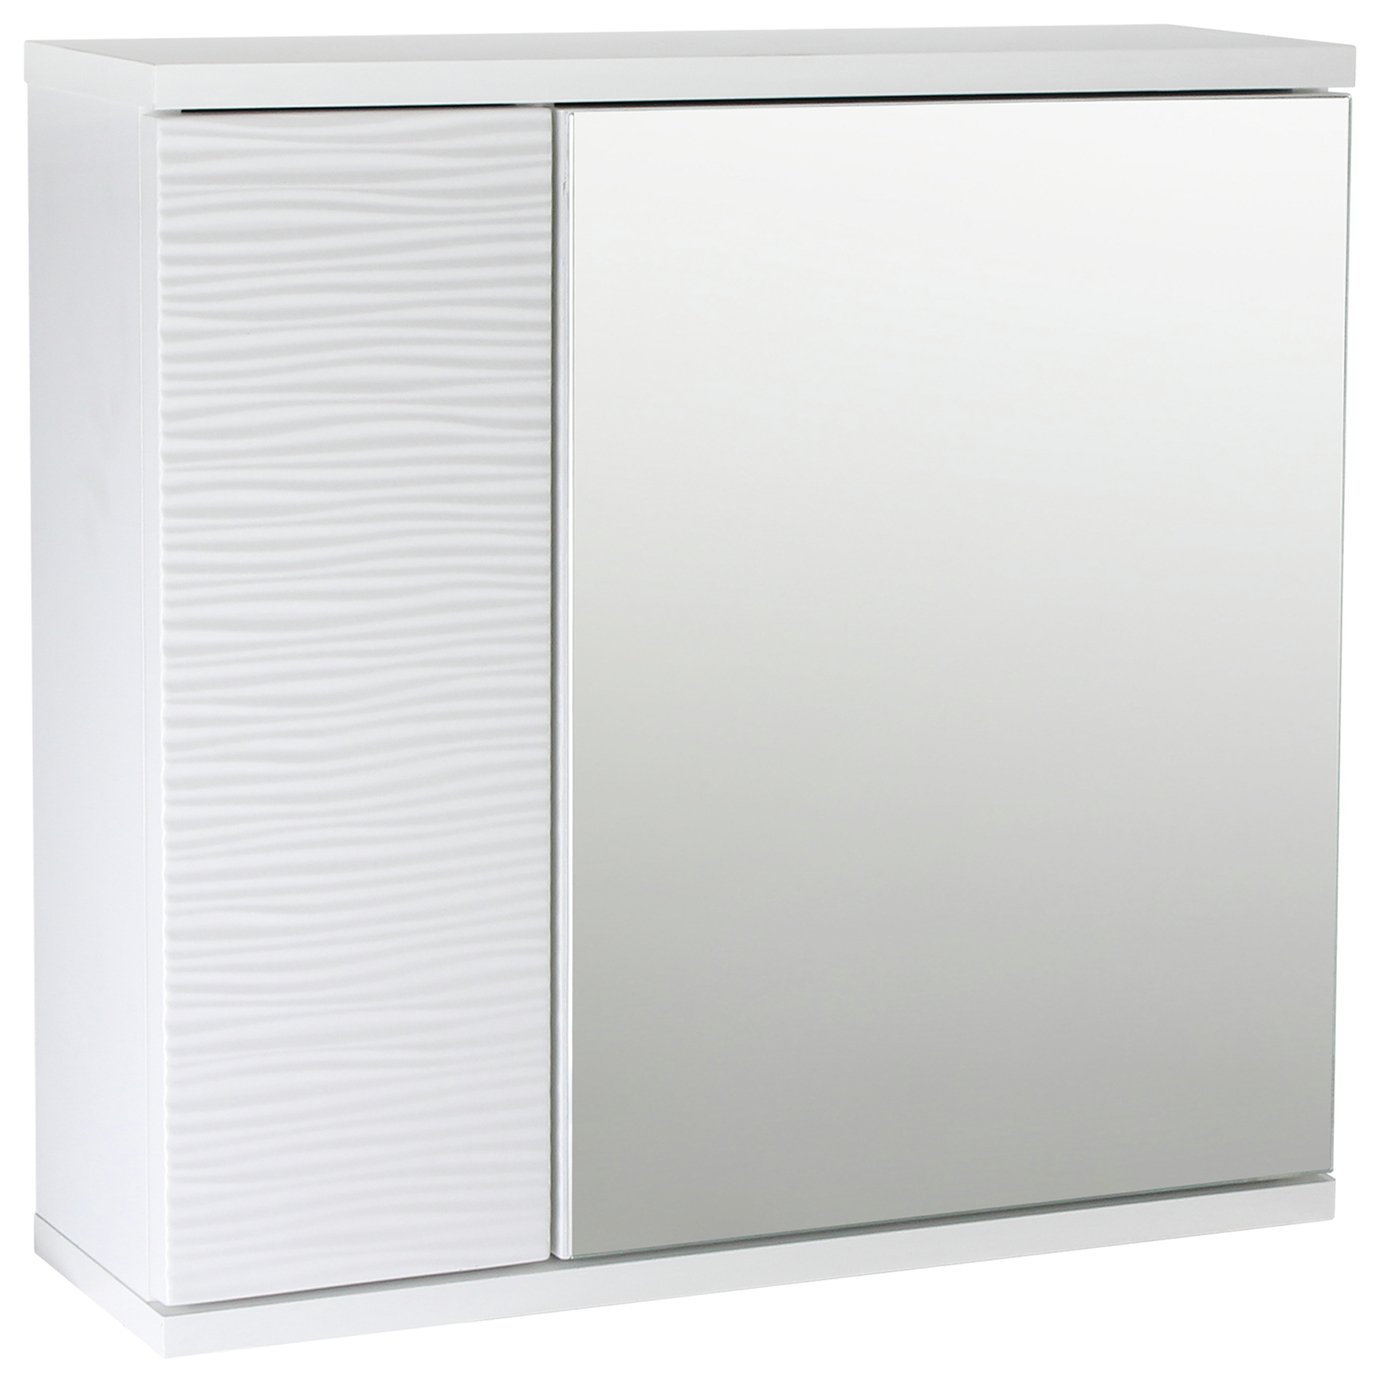 Argos Home Ripple 2 Door Mirrored Wall Cabinet review